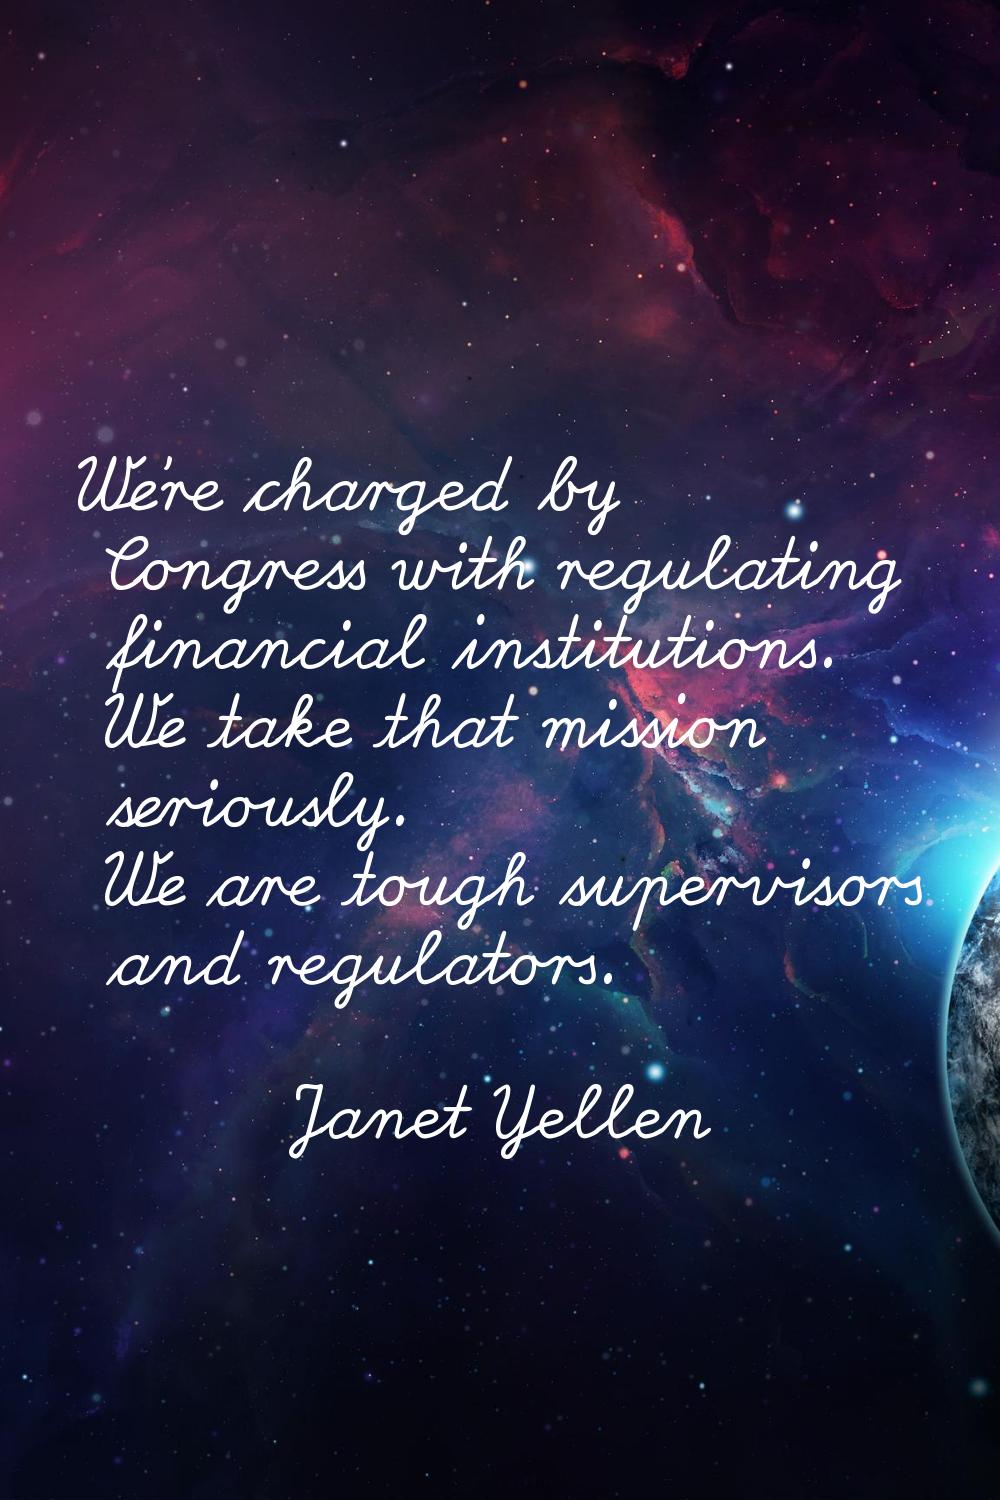 We're charged by Congress with regulating financial institutions. We take that mission seriously. W